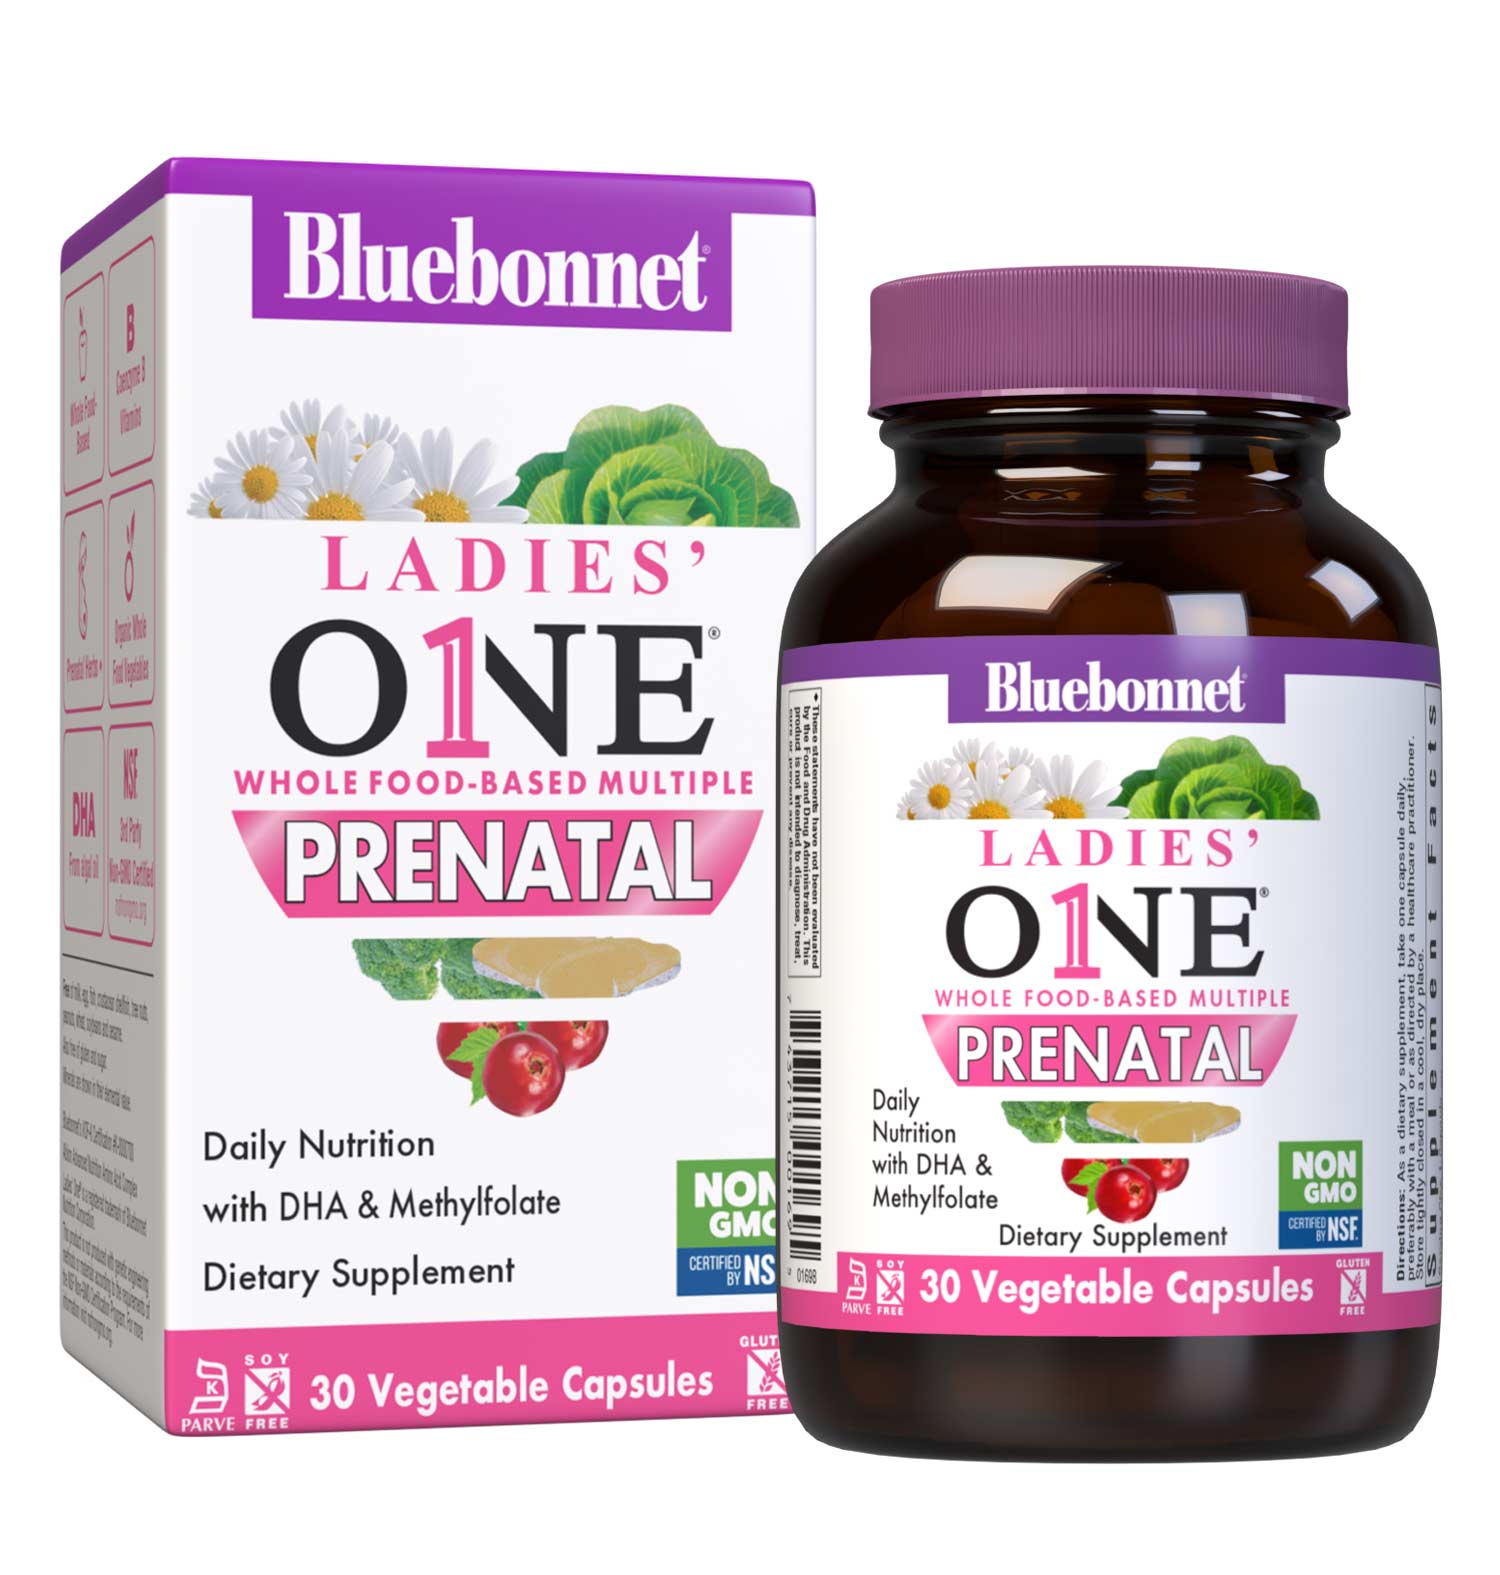 Bluebonnet’s Ladies’ ONE Prenatal Whole Food-Based Multiple 30 vegetable capsules provides daily nutritional support for women trying to conceive, pregnant or nursing in just one convenient capsule per serving. Delivers targeted nutrients for conception and fertility support, healthy pregnancy, proper baby growth and development, and lactation boost. Bottle with box. #size_30 count